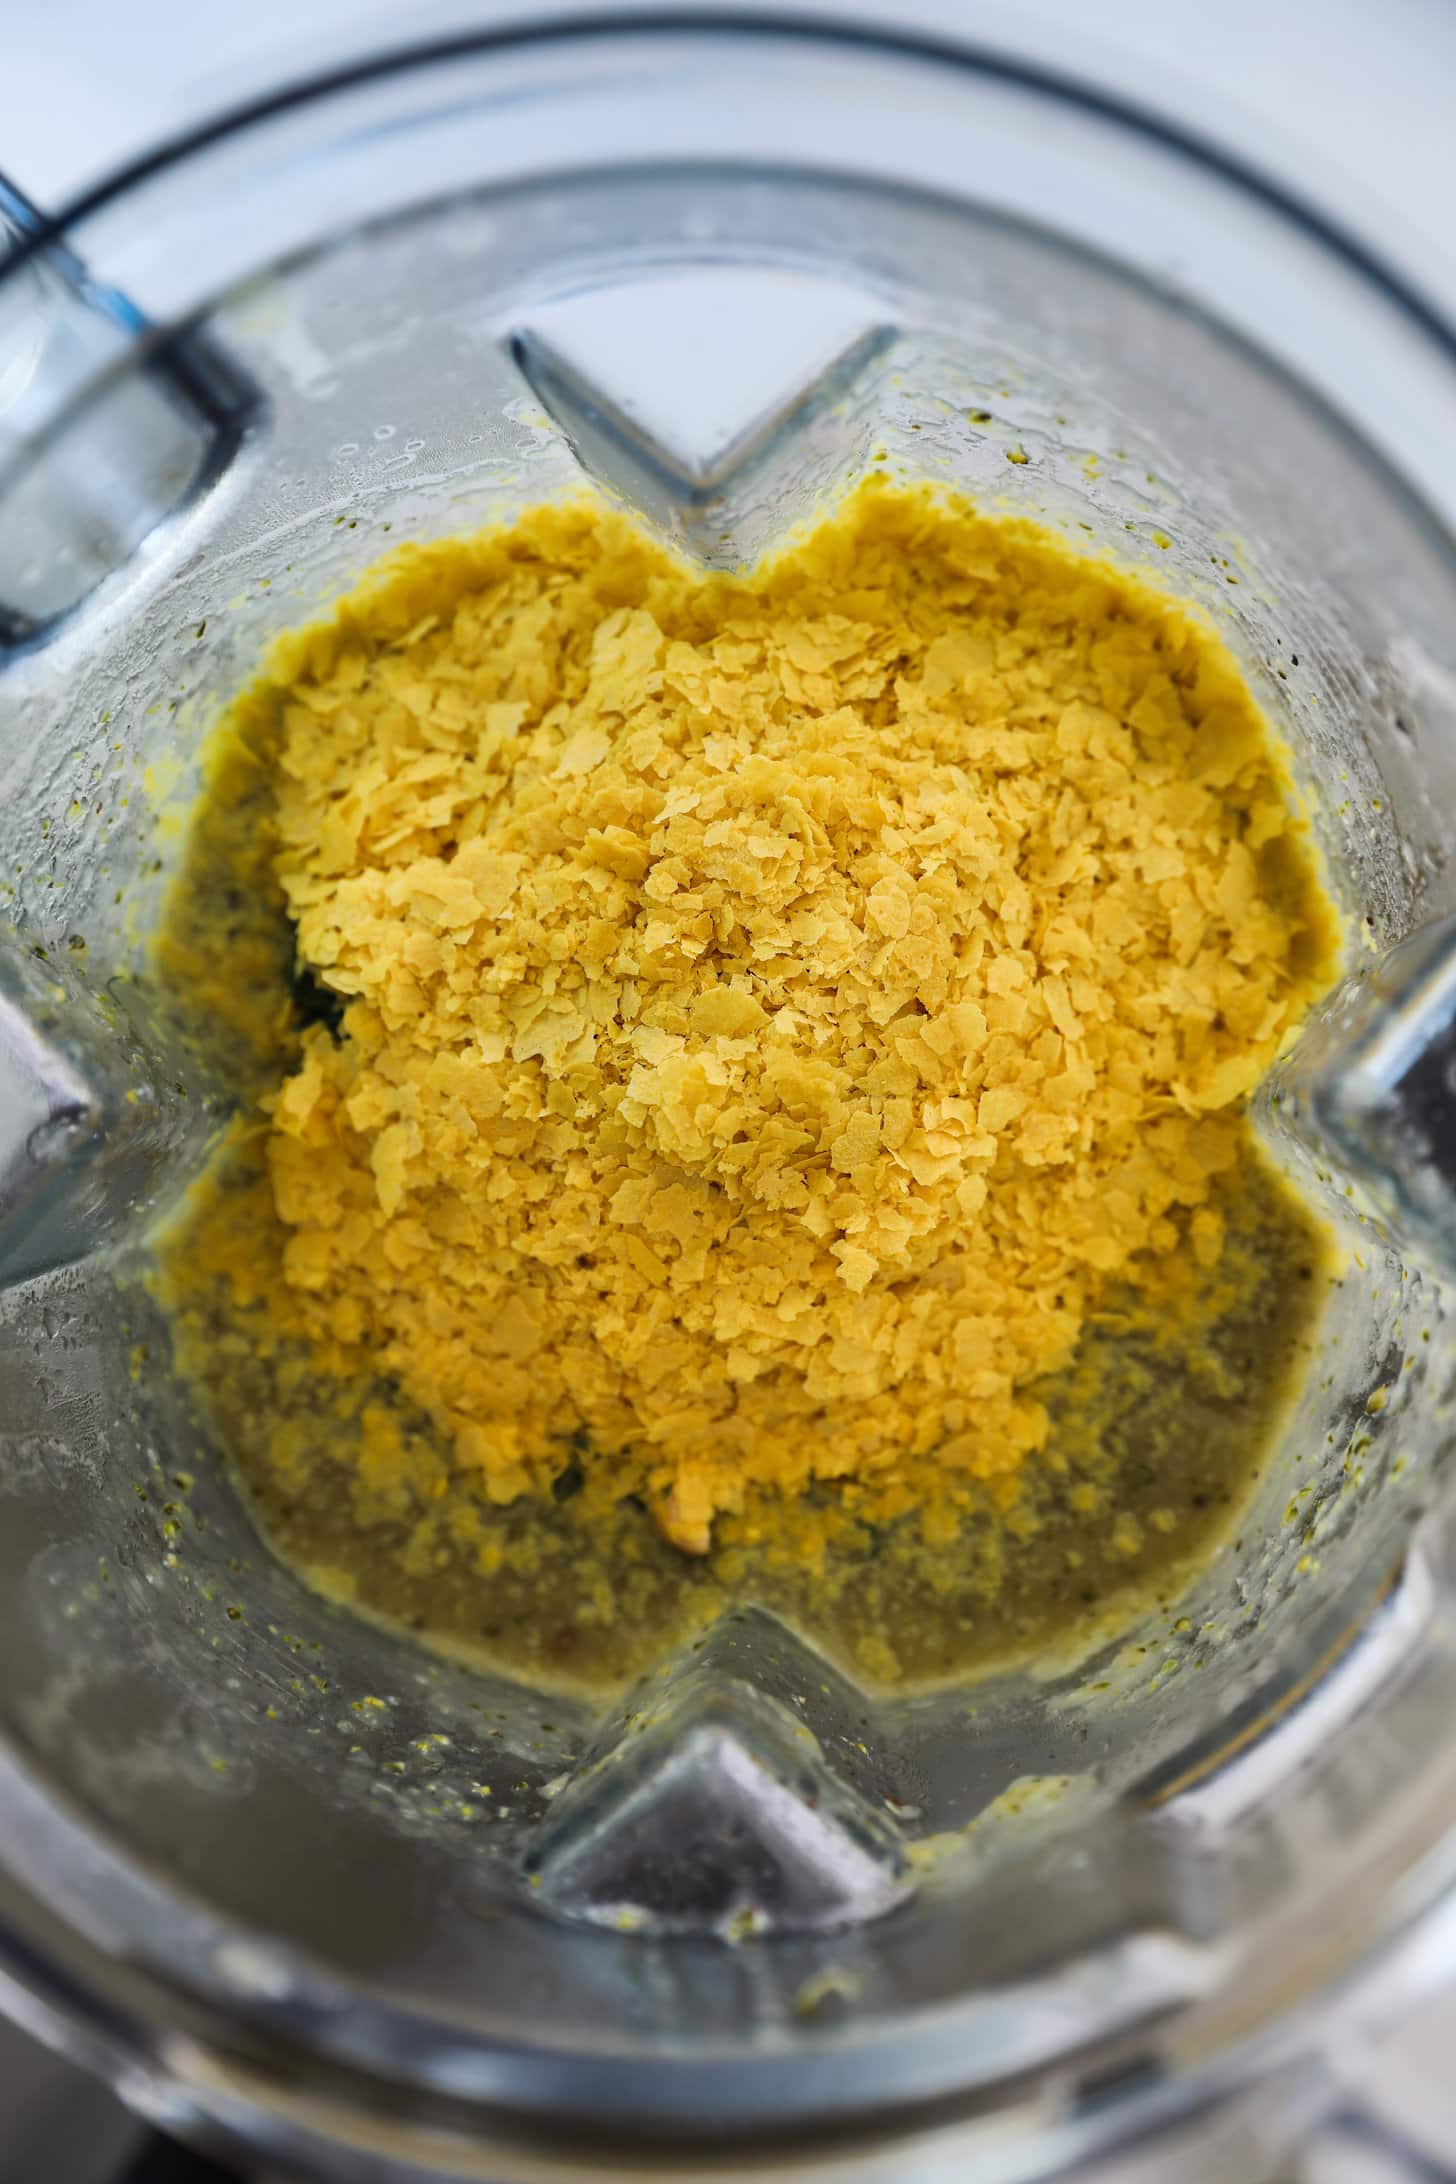 Birdseye view of a blender with yellow flakes.